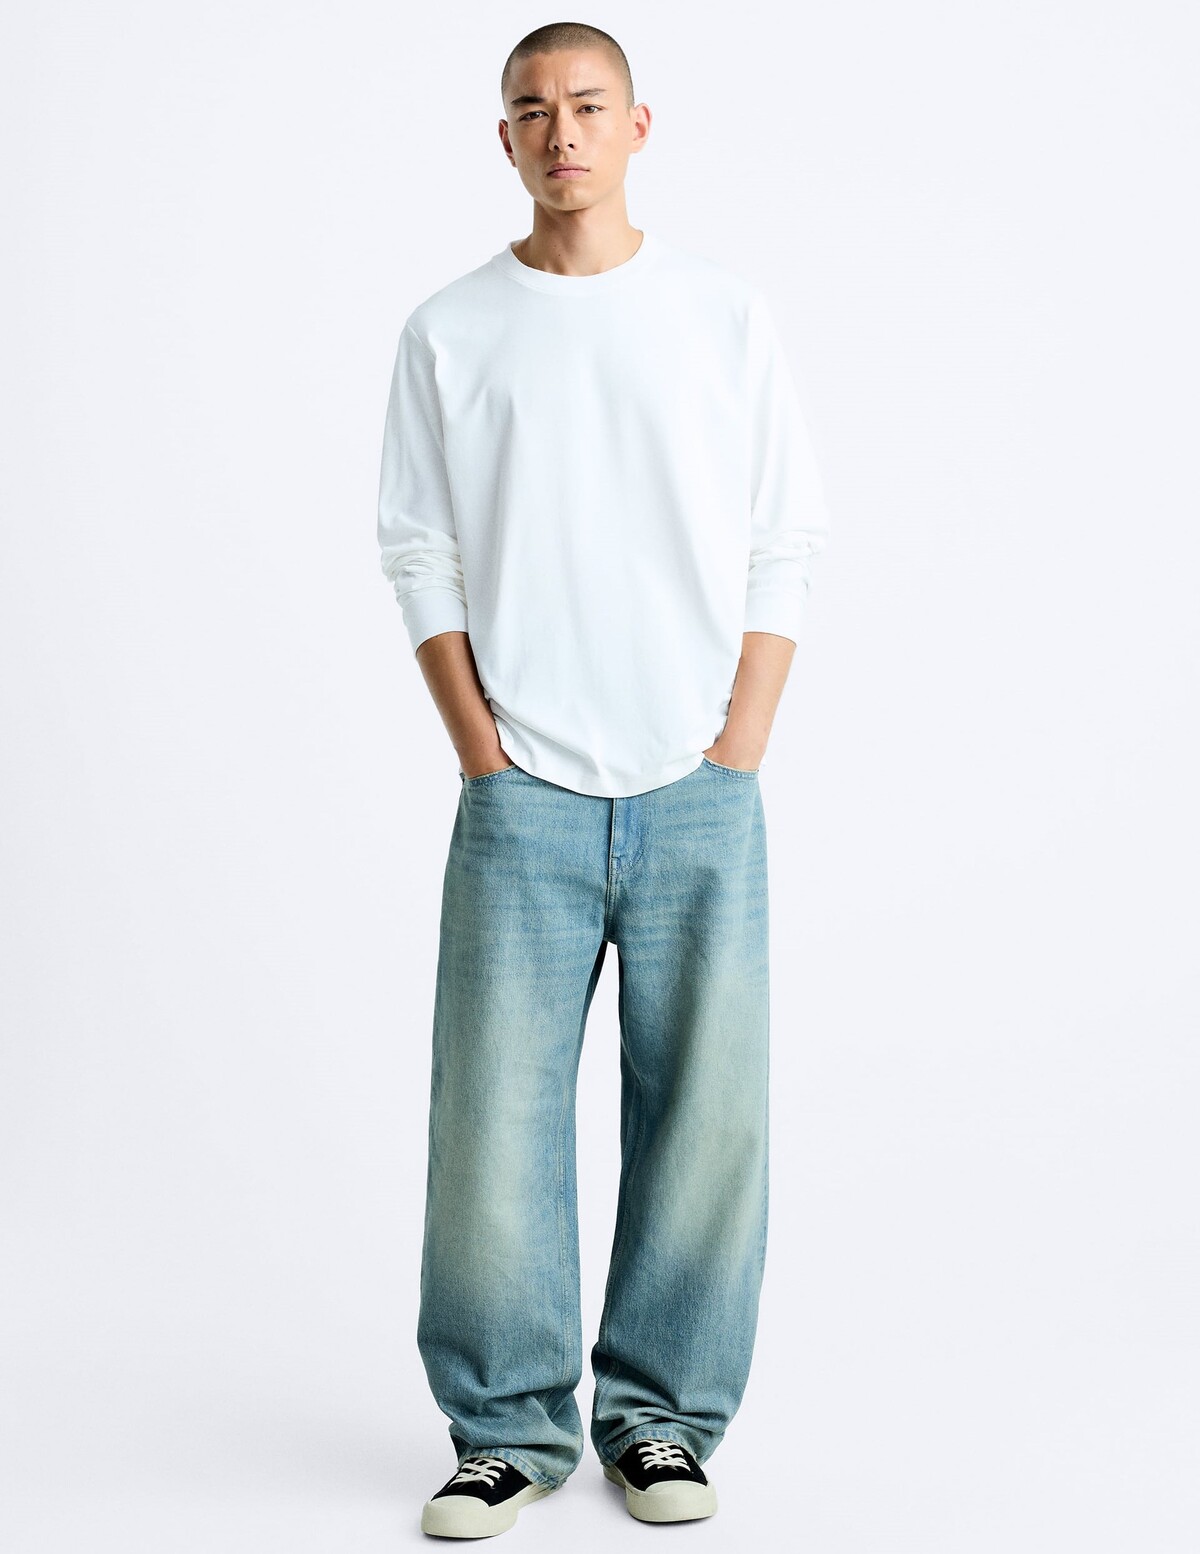 Jeans Baggy Fit from ZARA